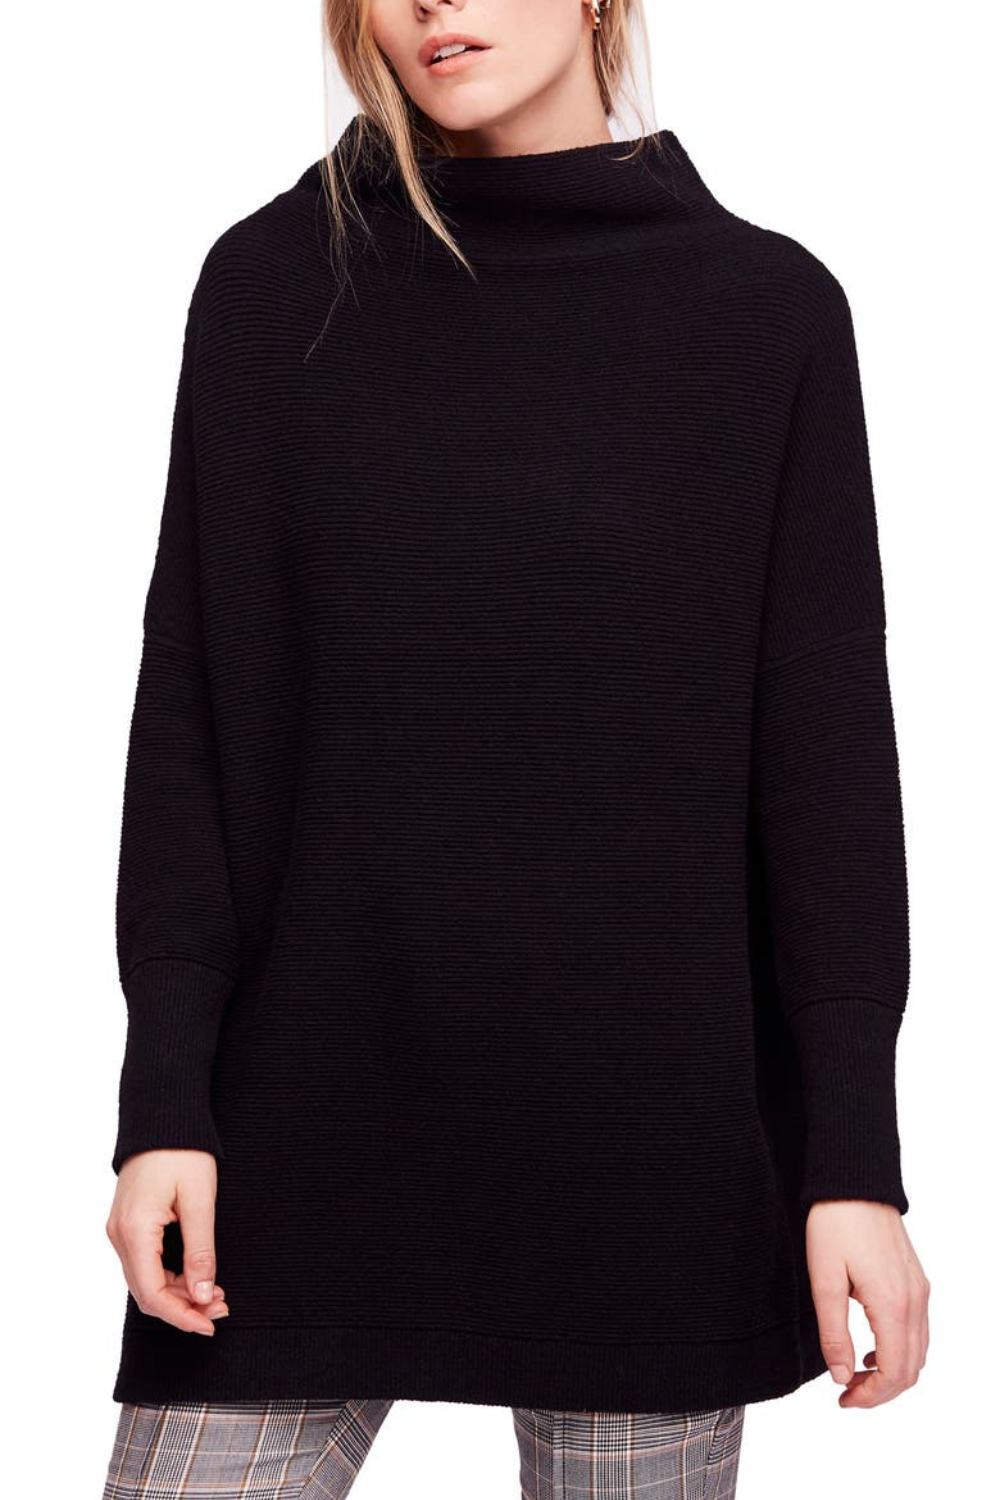 Ottoman slouchy tunic sweaters from Free People